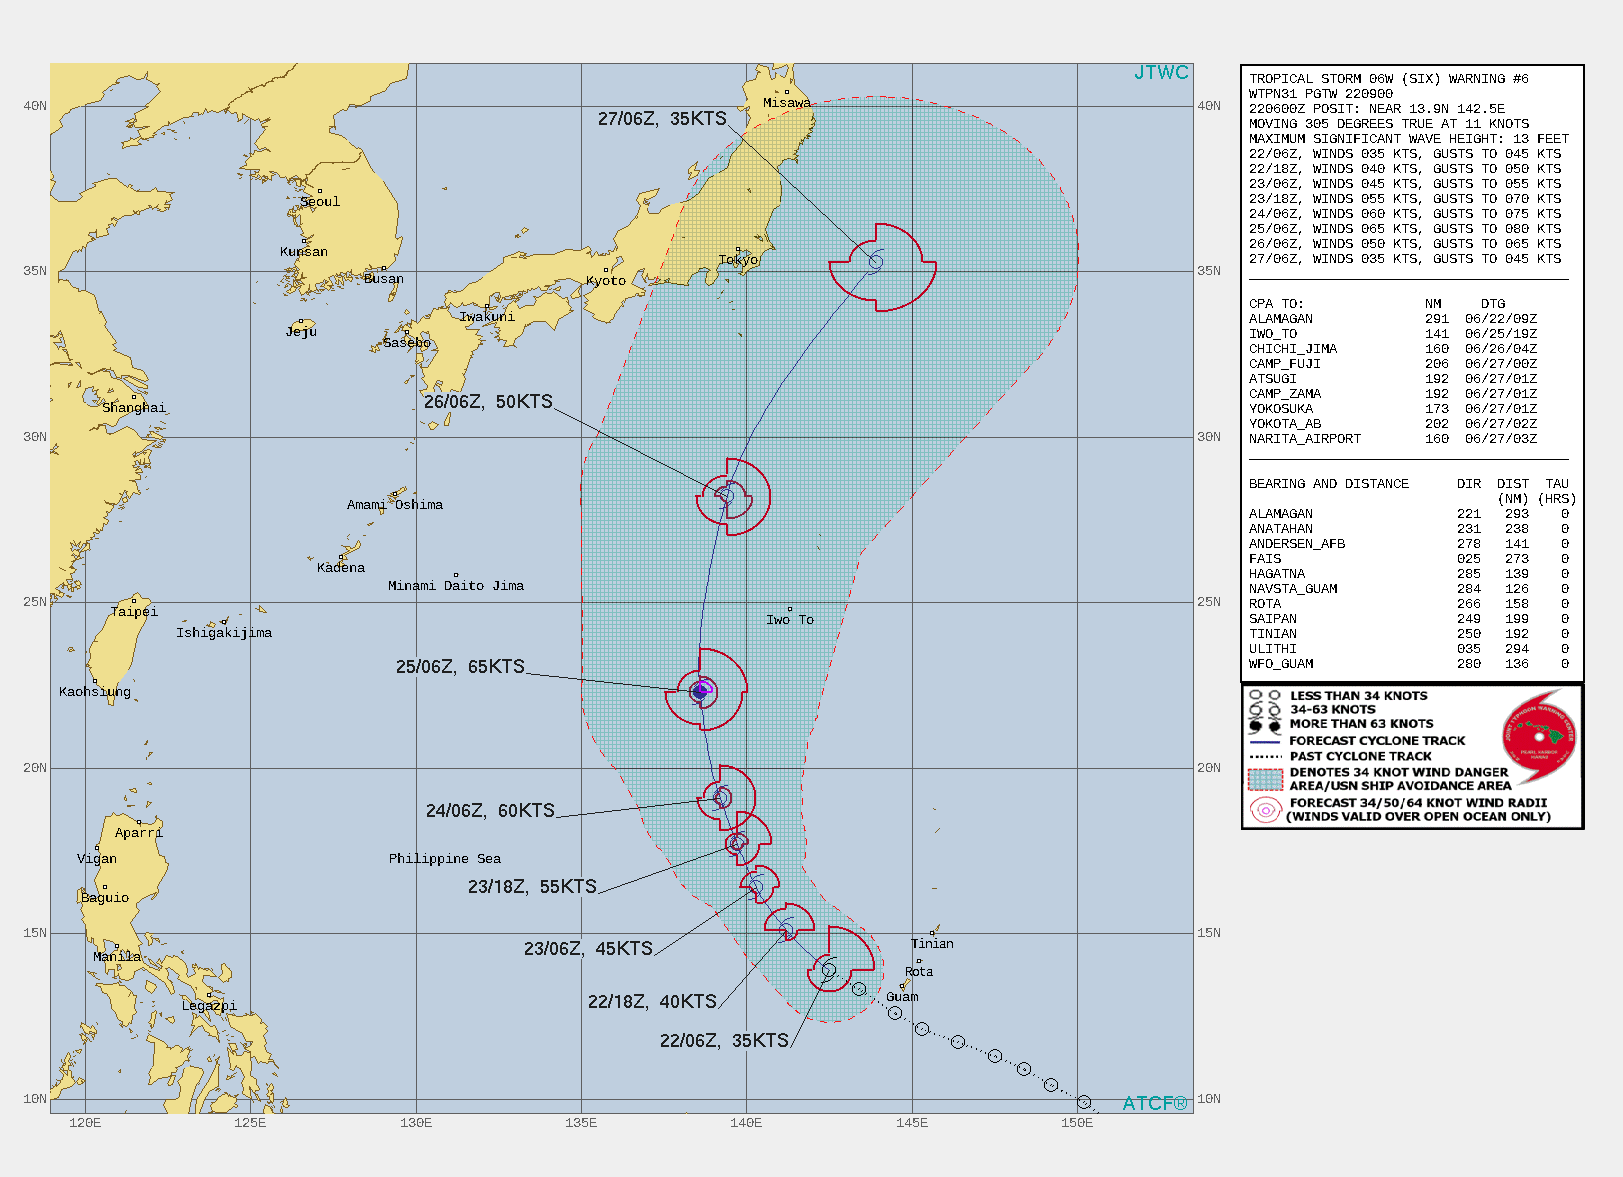 WARNING 6 ISSUED AT 22/09UTC.FORECAST DISCUSSION: TS 06W WILL CONTINUE ON ITS CURRENT TRACK THEN TURN MORE NORTHWARD AFTER 48H AND CREST THE SUBTROPICAL RIDGE(STR) AXIS BY 72H. AFTERWARD, IT WILL ACCELERATE NORTH-NORTHEASTWARD, THEN AFTER 96H, NORTHEASTWARD ON THE POLEWARD SIDE OF THE STR. THE MARGINALLY FAVORABLE ENVIRONMENT WILL FUEL A STEADY INTENSIFICATION TO A PEAK OF 65KNOTS/US CATEGORY 1 BY 72H. AFTERWARD, INCREASING VERTICAL WIND SHEAR(VWS) AND COOLING SSTS WILL SLOWLY ERODE THE CYCLONE. CONCURRENTLY BY 96H, IT WILL BEGIN EXTRA-TROPICAL TRANSITION (ETT) AS IT ENTERS THE COLD BAROCLINIC ZONE AND MERGES WITH THE MEIYU FRONTAL BOUNDARY SOUTHEAST OF JAPAN. BY 120H, TS 06W WILL COMPLETE ETT AND EMBED INTO THE GRADIENT FLOW AS A STORM-FORCE COLD CORE LOW WITH AN EXPANSIVE WIND FIELD.